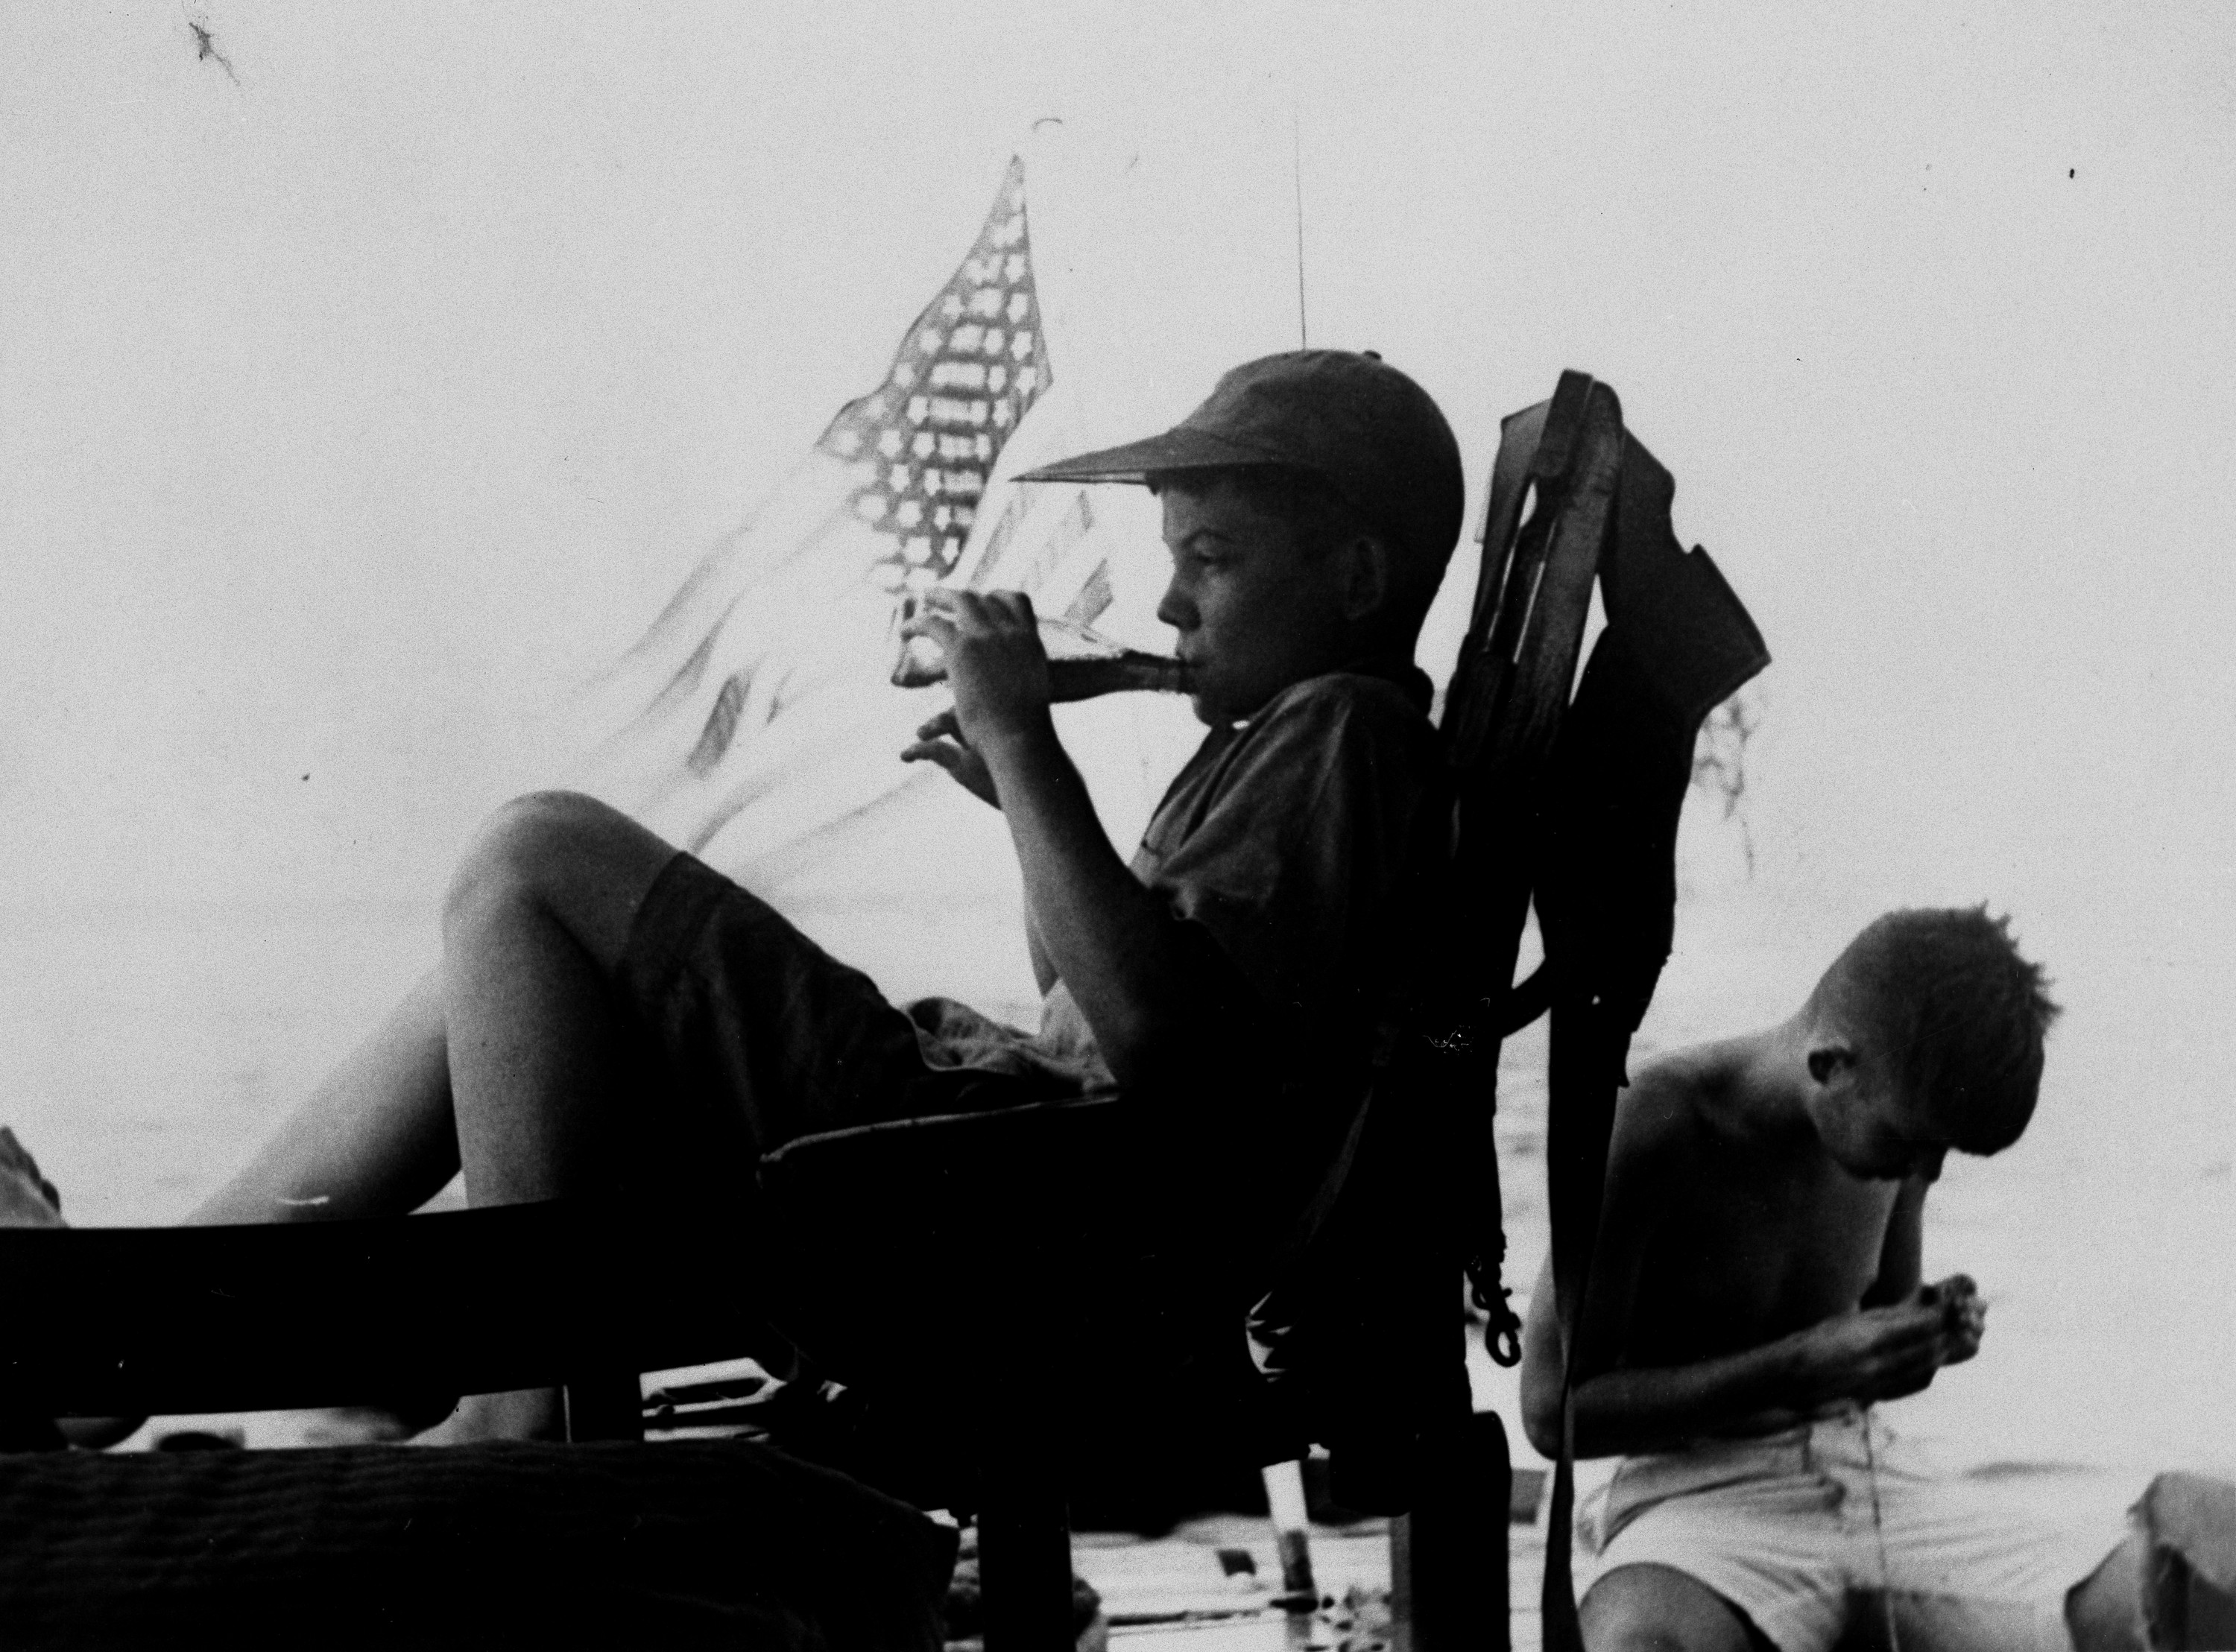 A black and white photograph of Hemingway's teen-aged children Gregory and Patrick aboard Hemingway's boat.  Gregory, seated in the foreground, wears a billed cap and is drinking from a clear glass bottle.  Patrick, in the background, wears white shorts and is concentrating on something small he holds in his hand.  The United States flag flies as ensign off the stern of the boat.